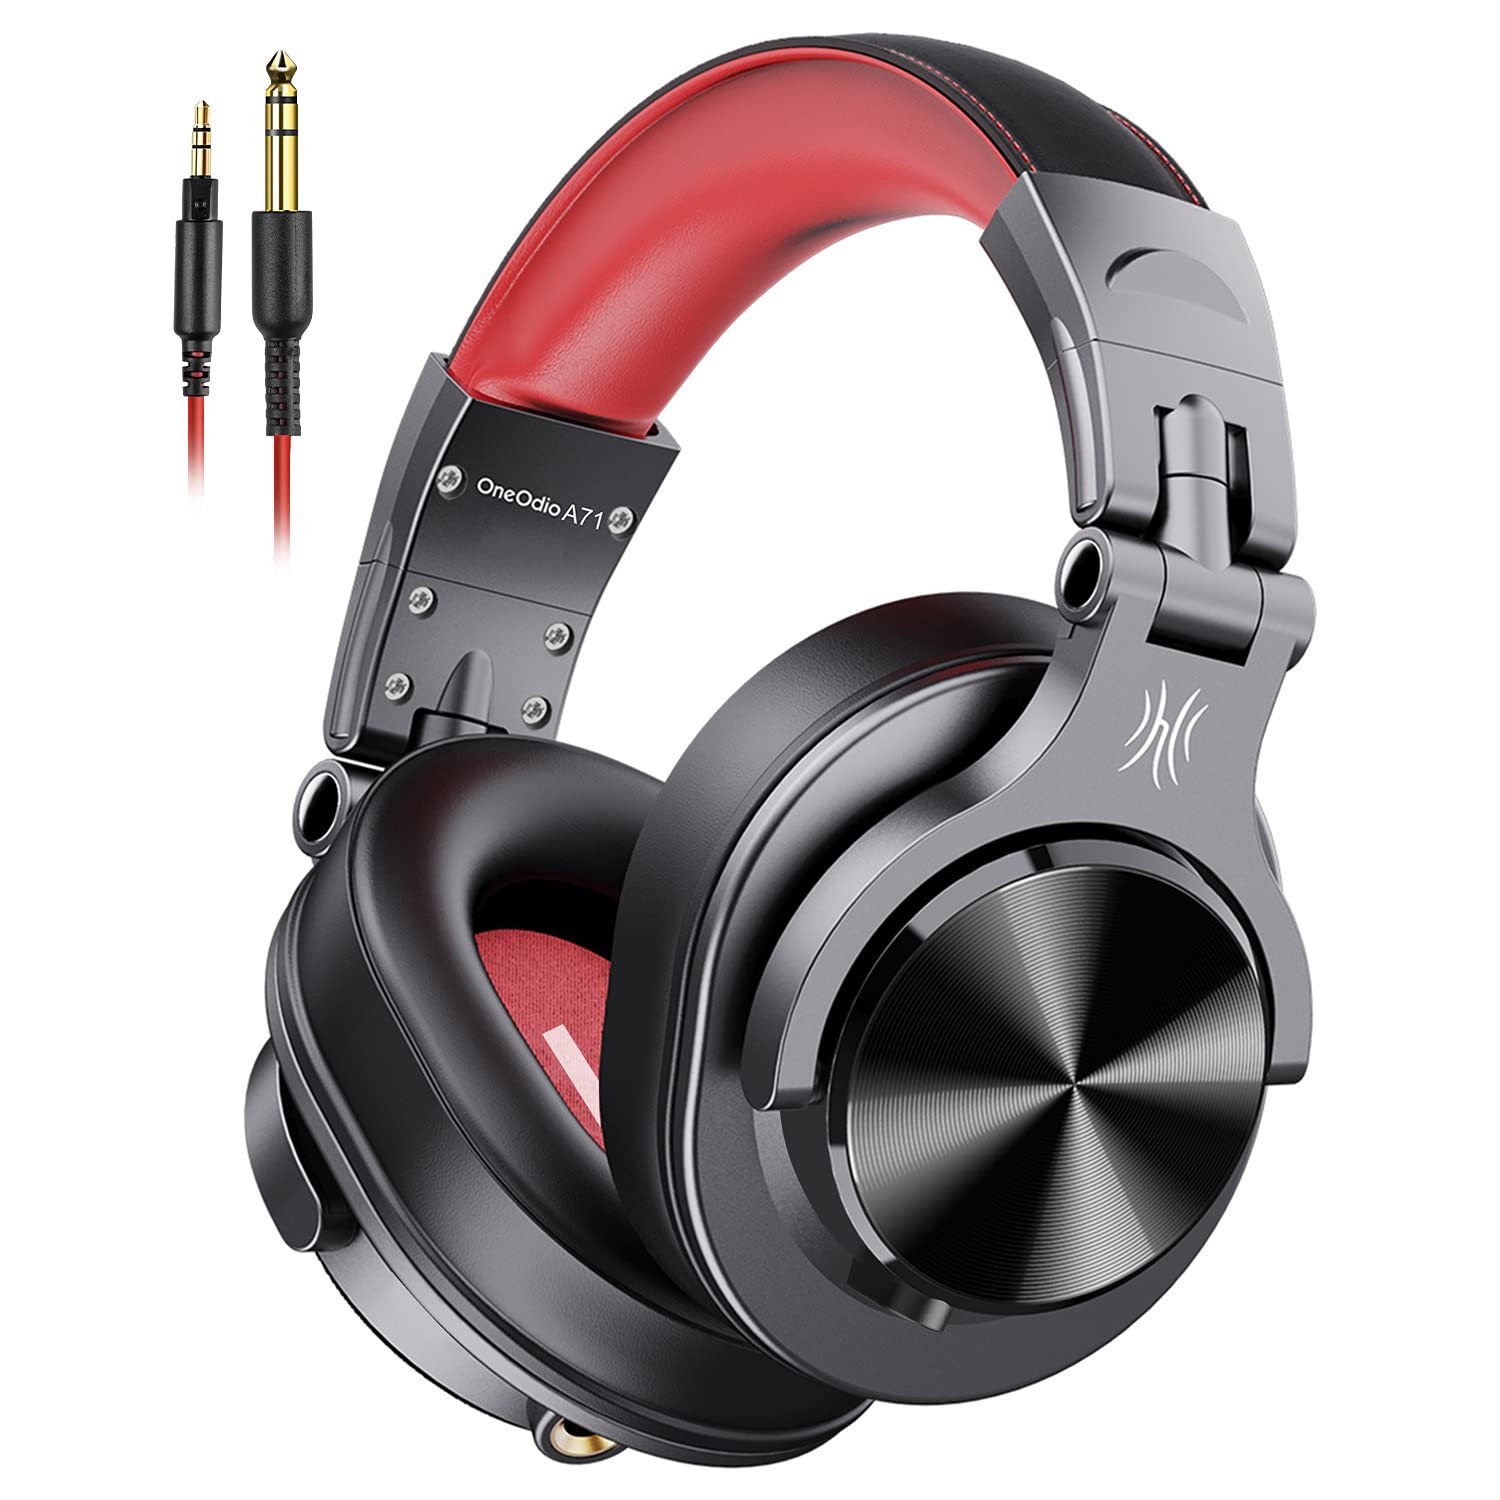 OneOdio A71 Wired Over Ear Headphones, Studio Headphones with SharePort, Professional Monitor Recording & Mixing Foldable He